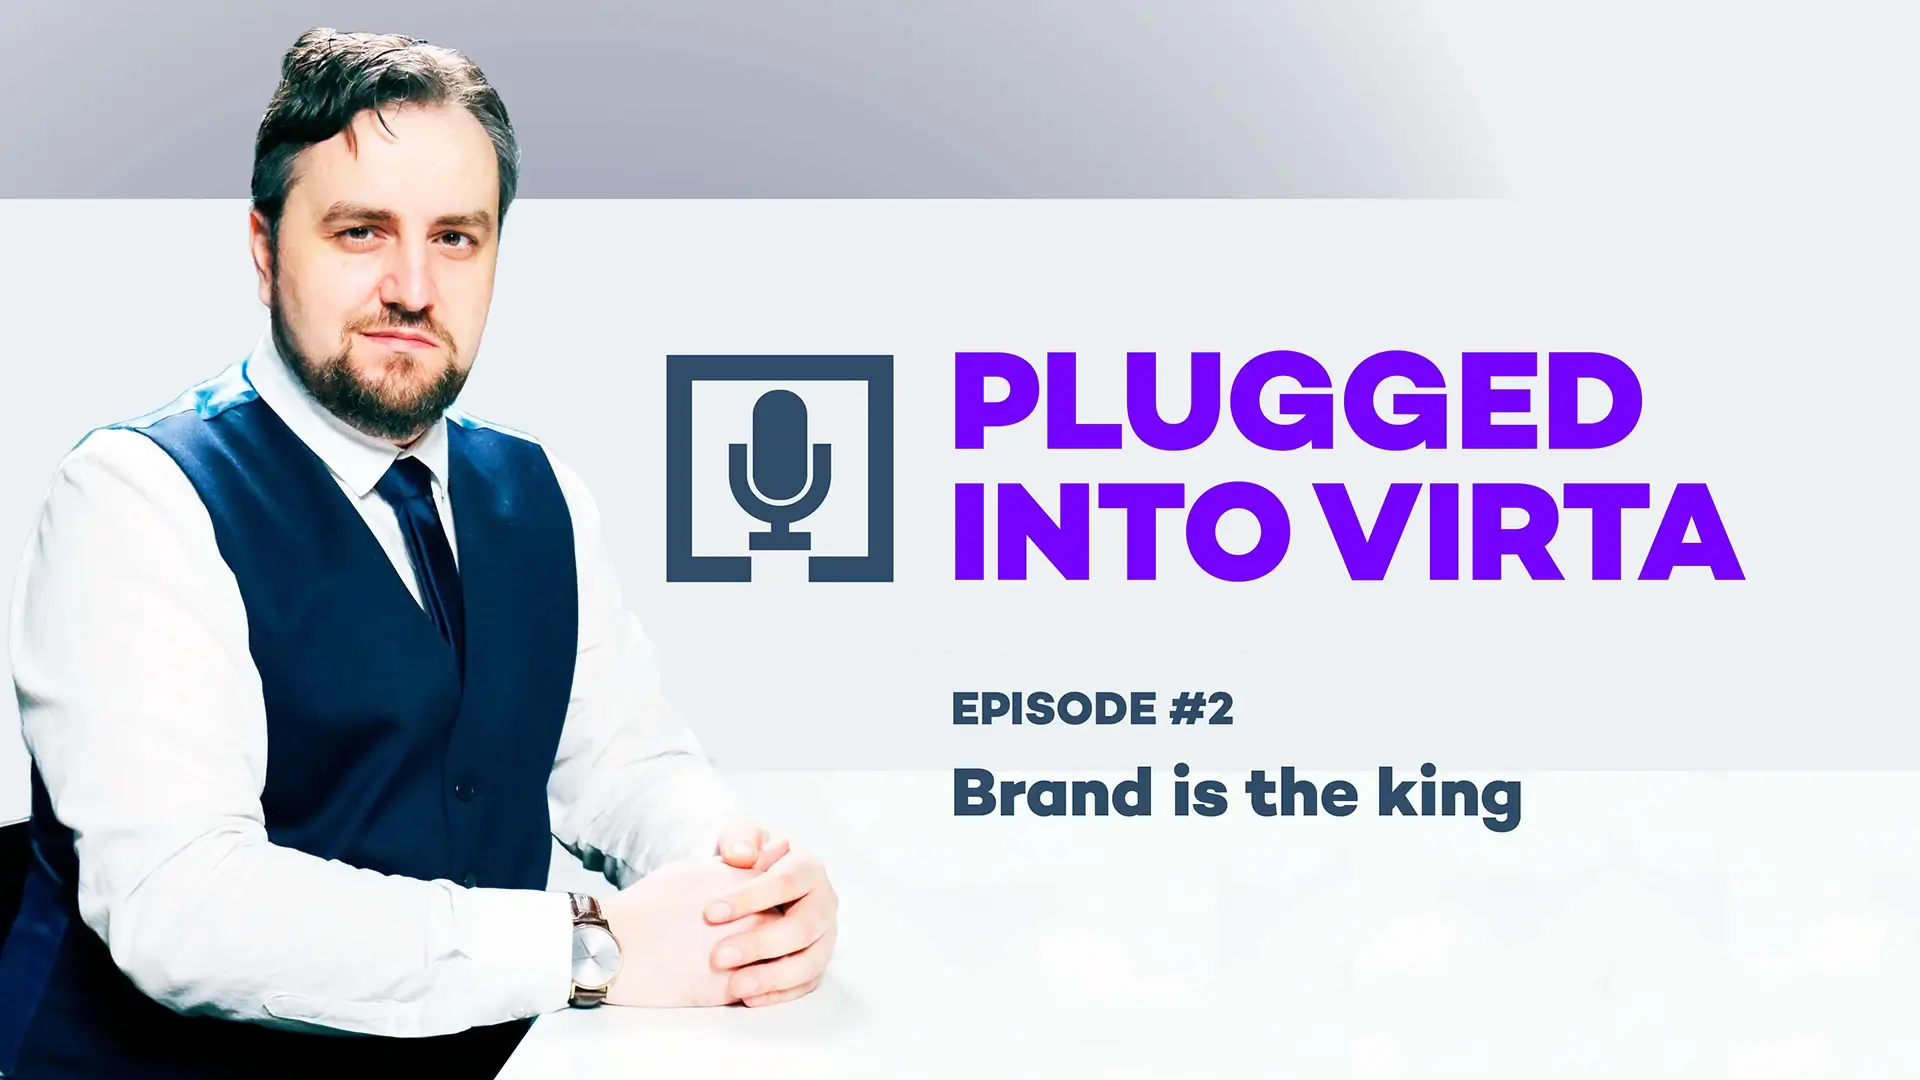 Plugged into Virta Episode 2 Brand is the king